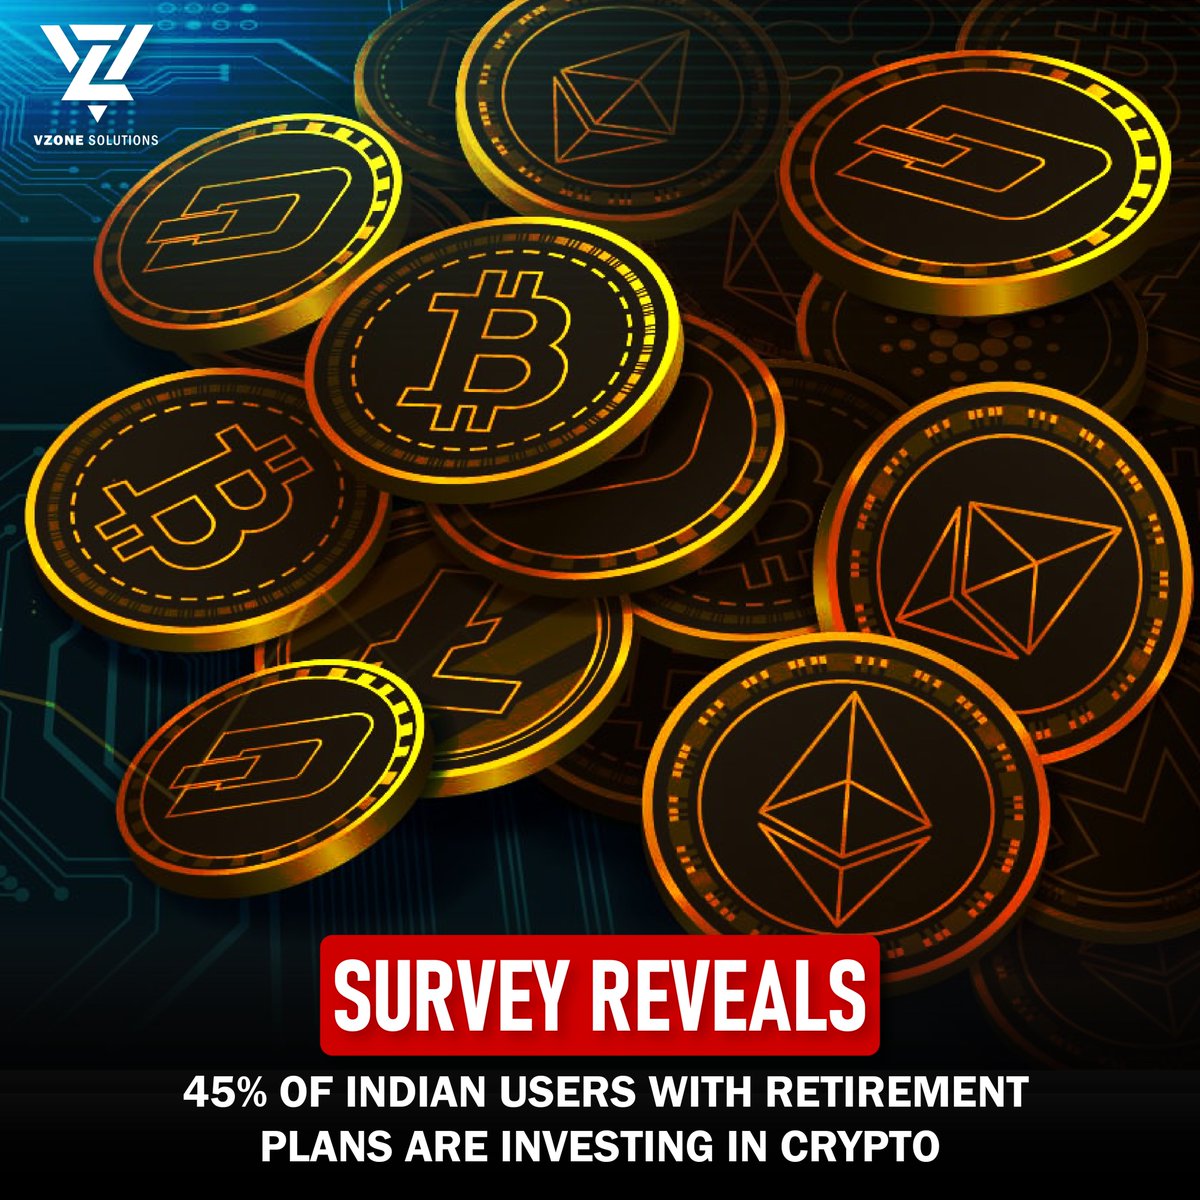 A recent Mudrex survey reveals that almost 45% of India's retirement planners have ventured into the world of cryptocurrencies.

#VZone #VZonesolutions #BitcoinETF #MudrexSurvey #CryptocurrencyAdoption #RetirementPlanning #IndianInvestors #CryptoTrends #FinancialFuture